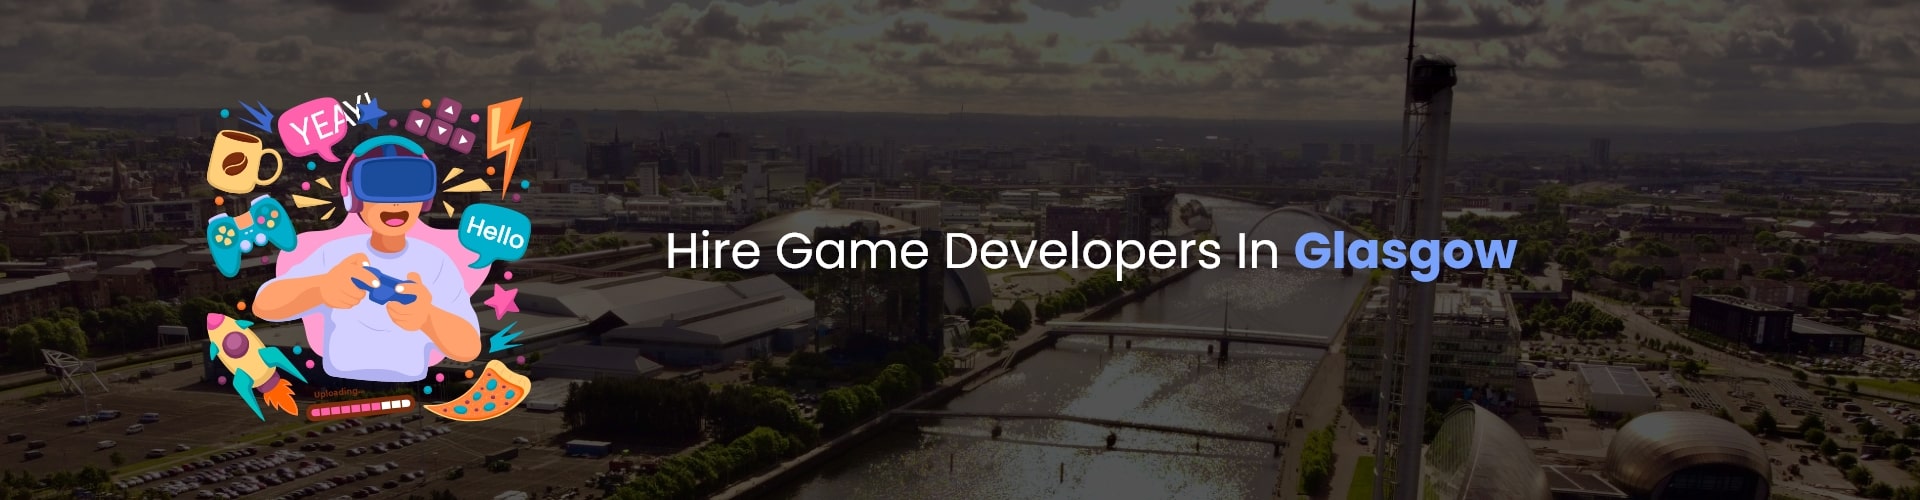 hire game developers in glasgow